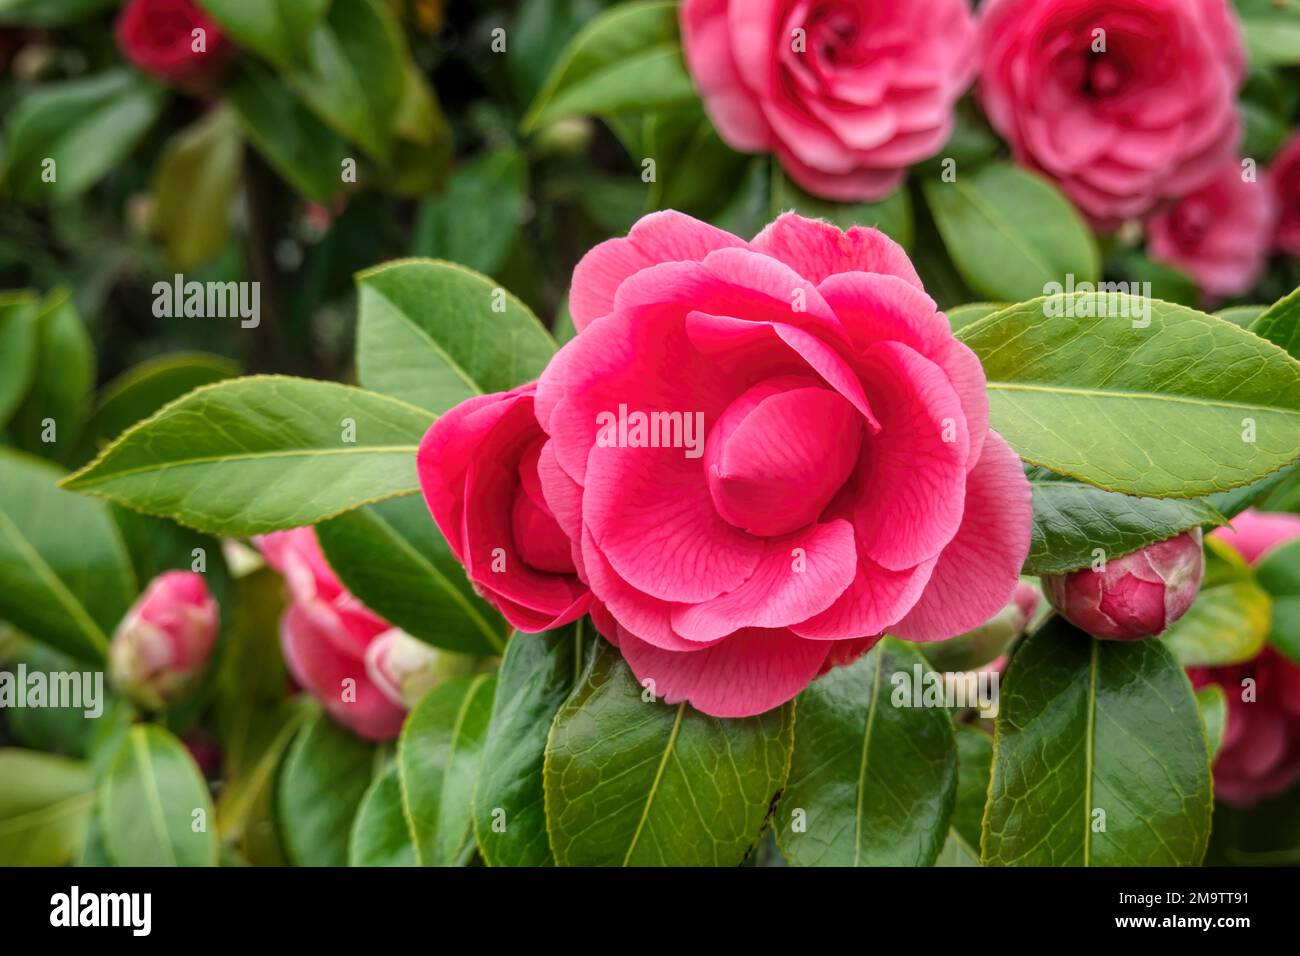 Closeup of a Camellia blossom opening up (Camellia japonica) - blooming in the springtime. Stock Photo